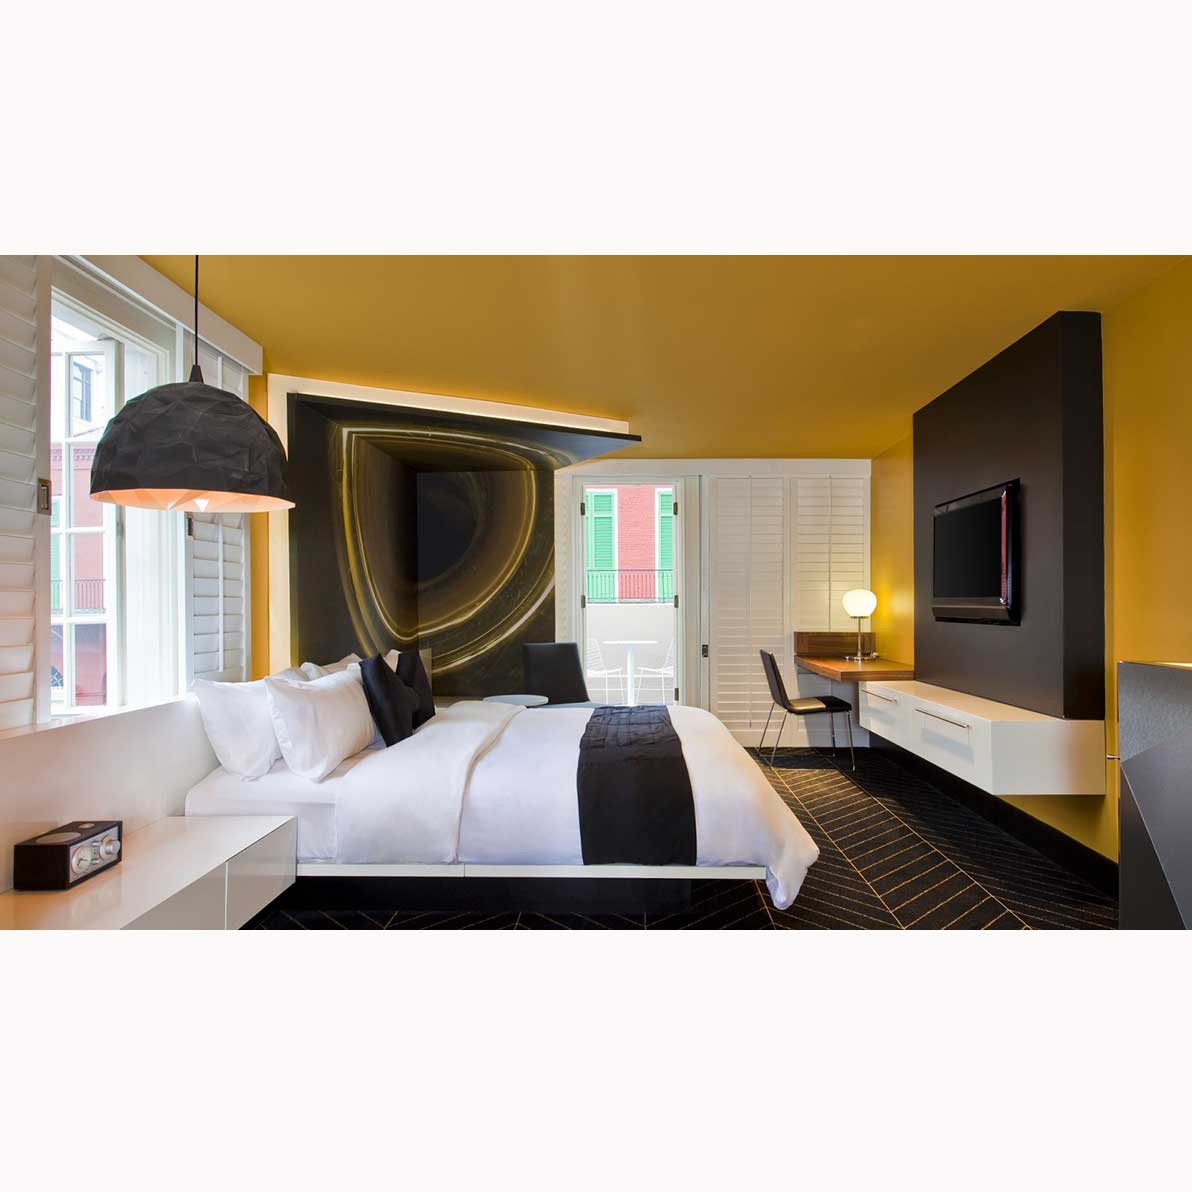 10 Most Affordable and Stylish New Orleans Hotels
